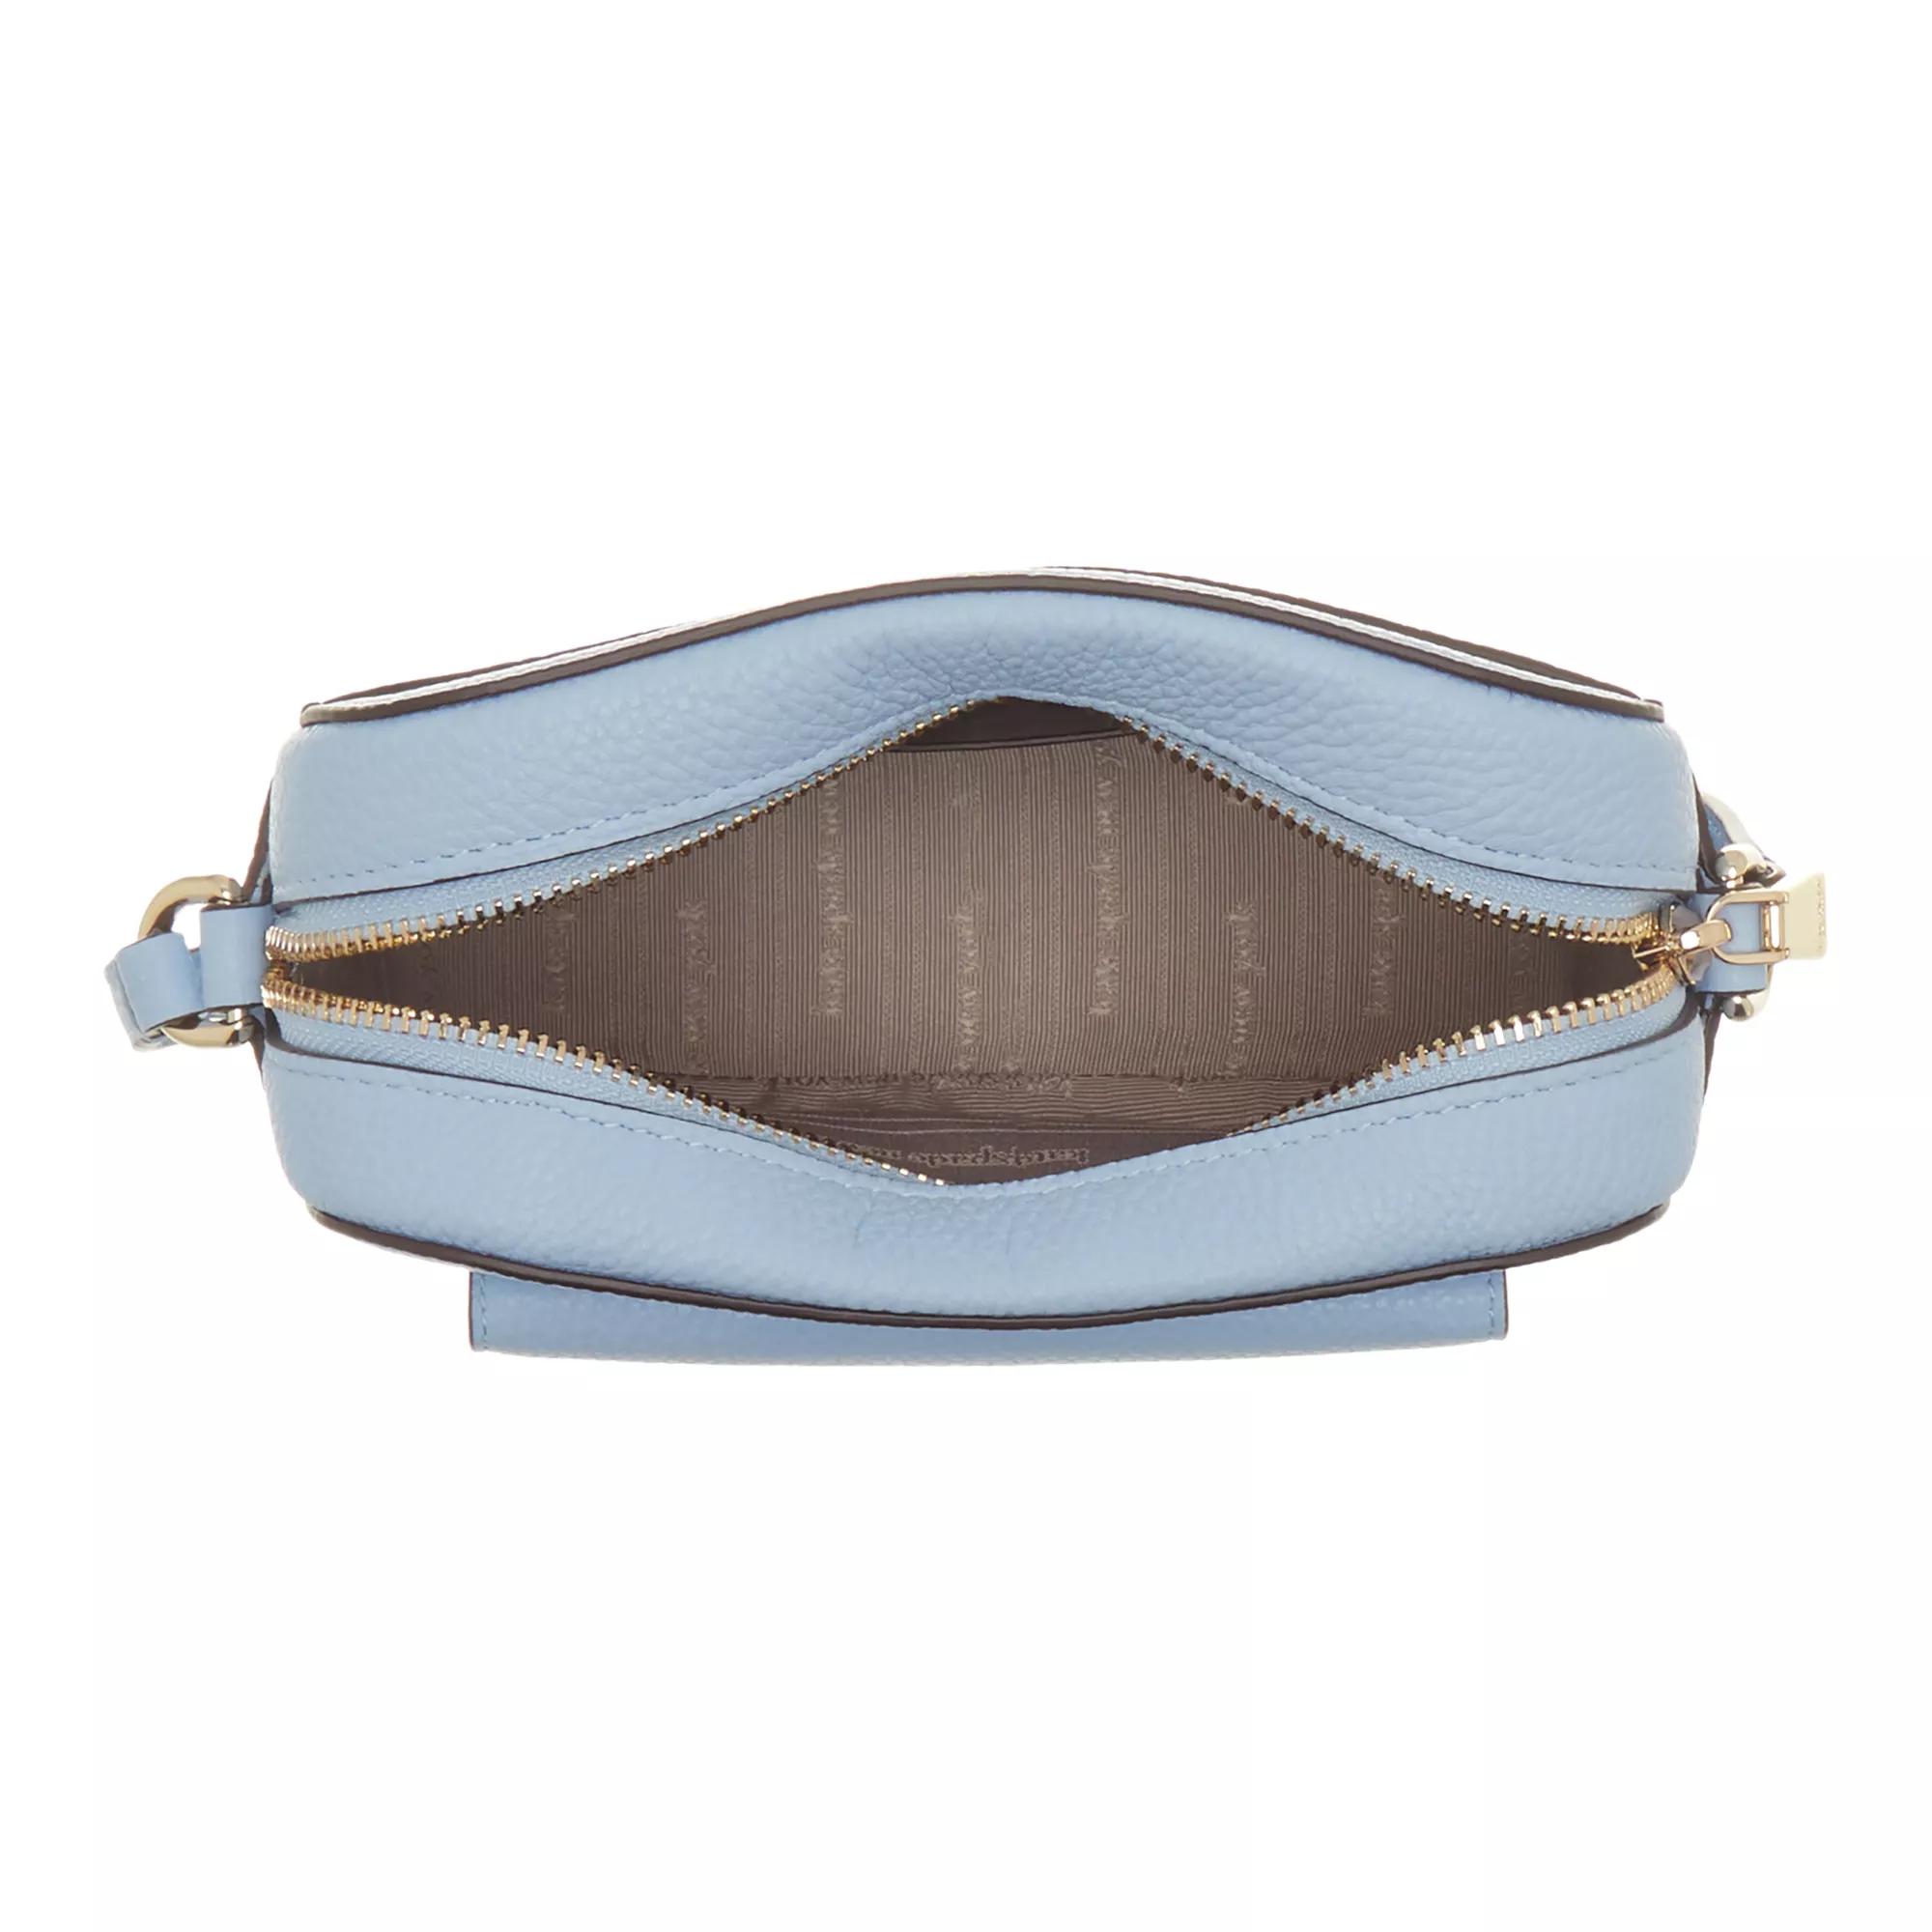 kate spade new york Crossbody bags Ava Pebbled Leather in blauw